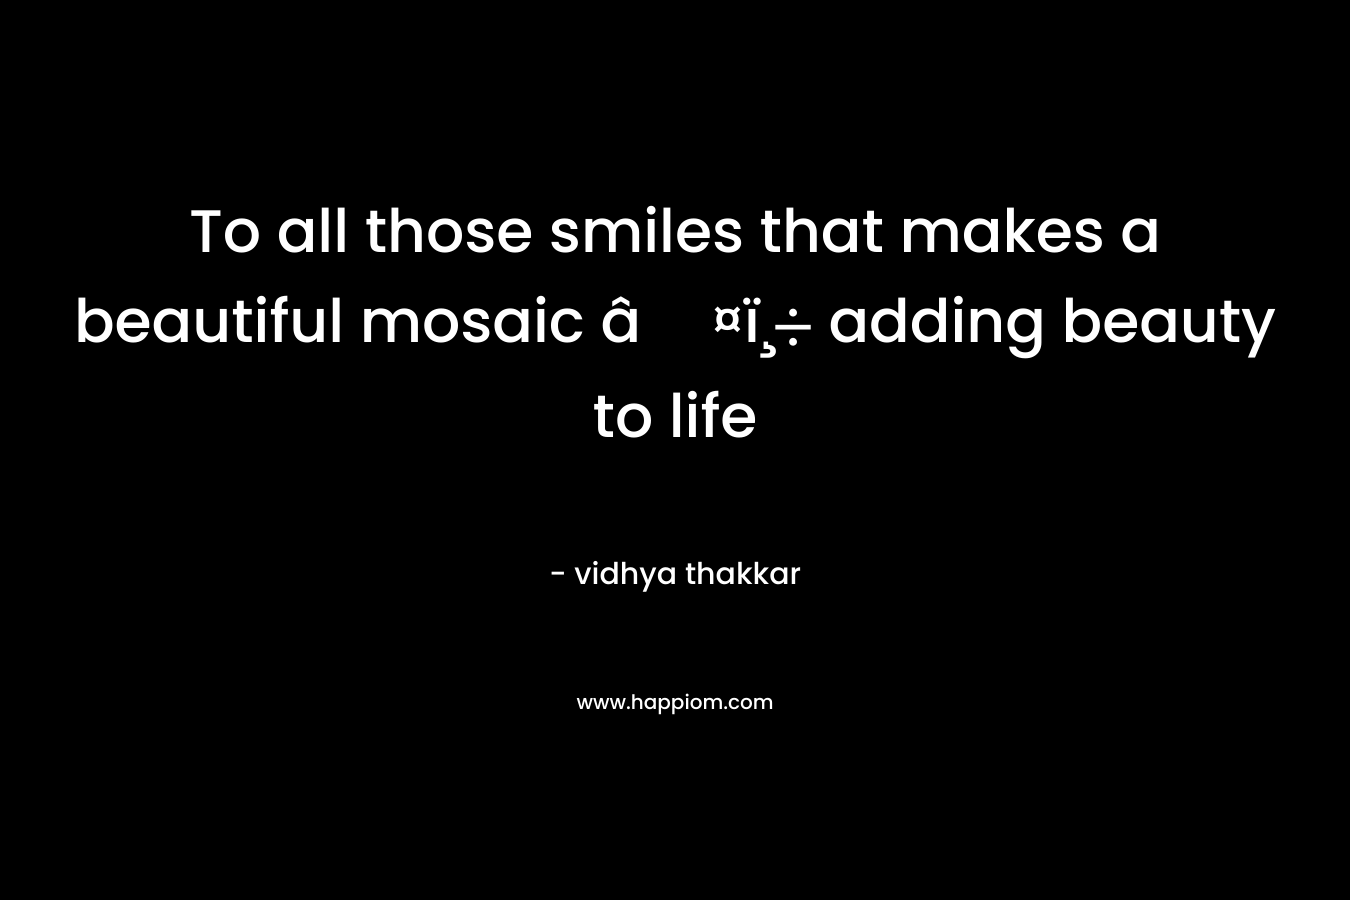 To all those smiles that makes a beautiful mosaic â¤ï¸ adding beauty to life – vidhya thakkar